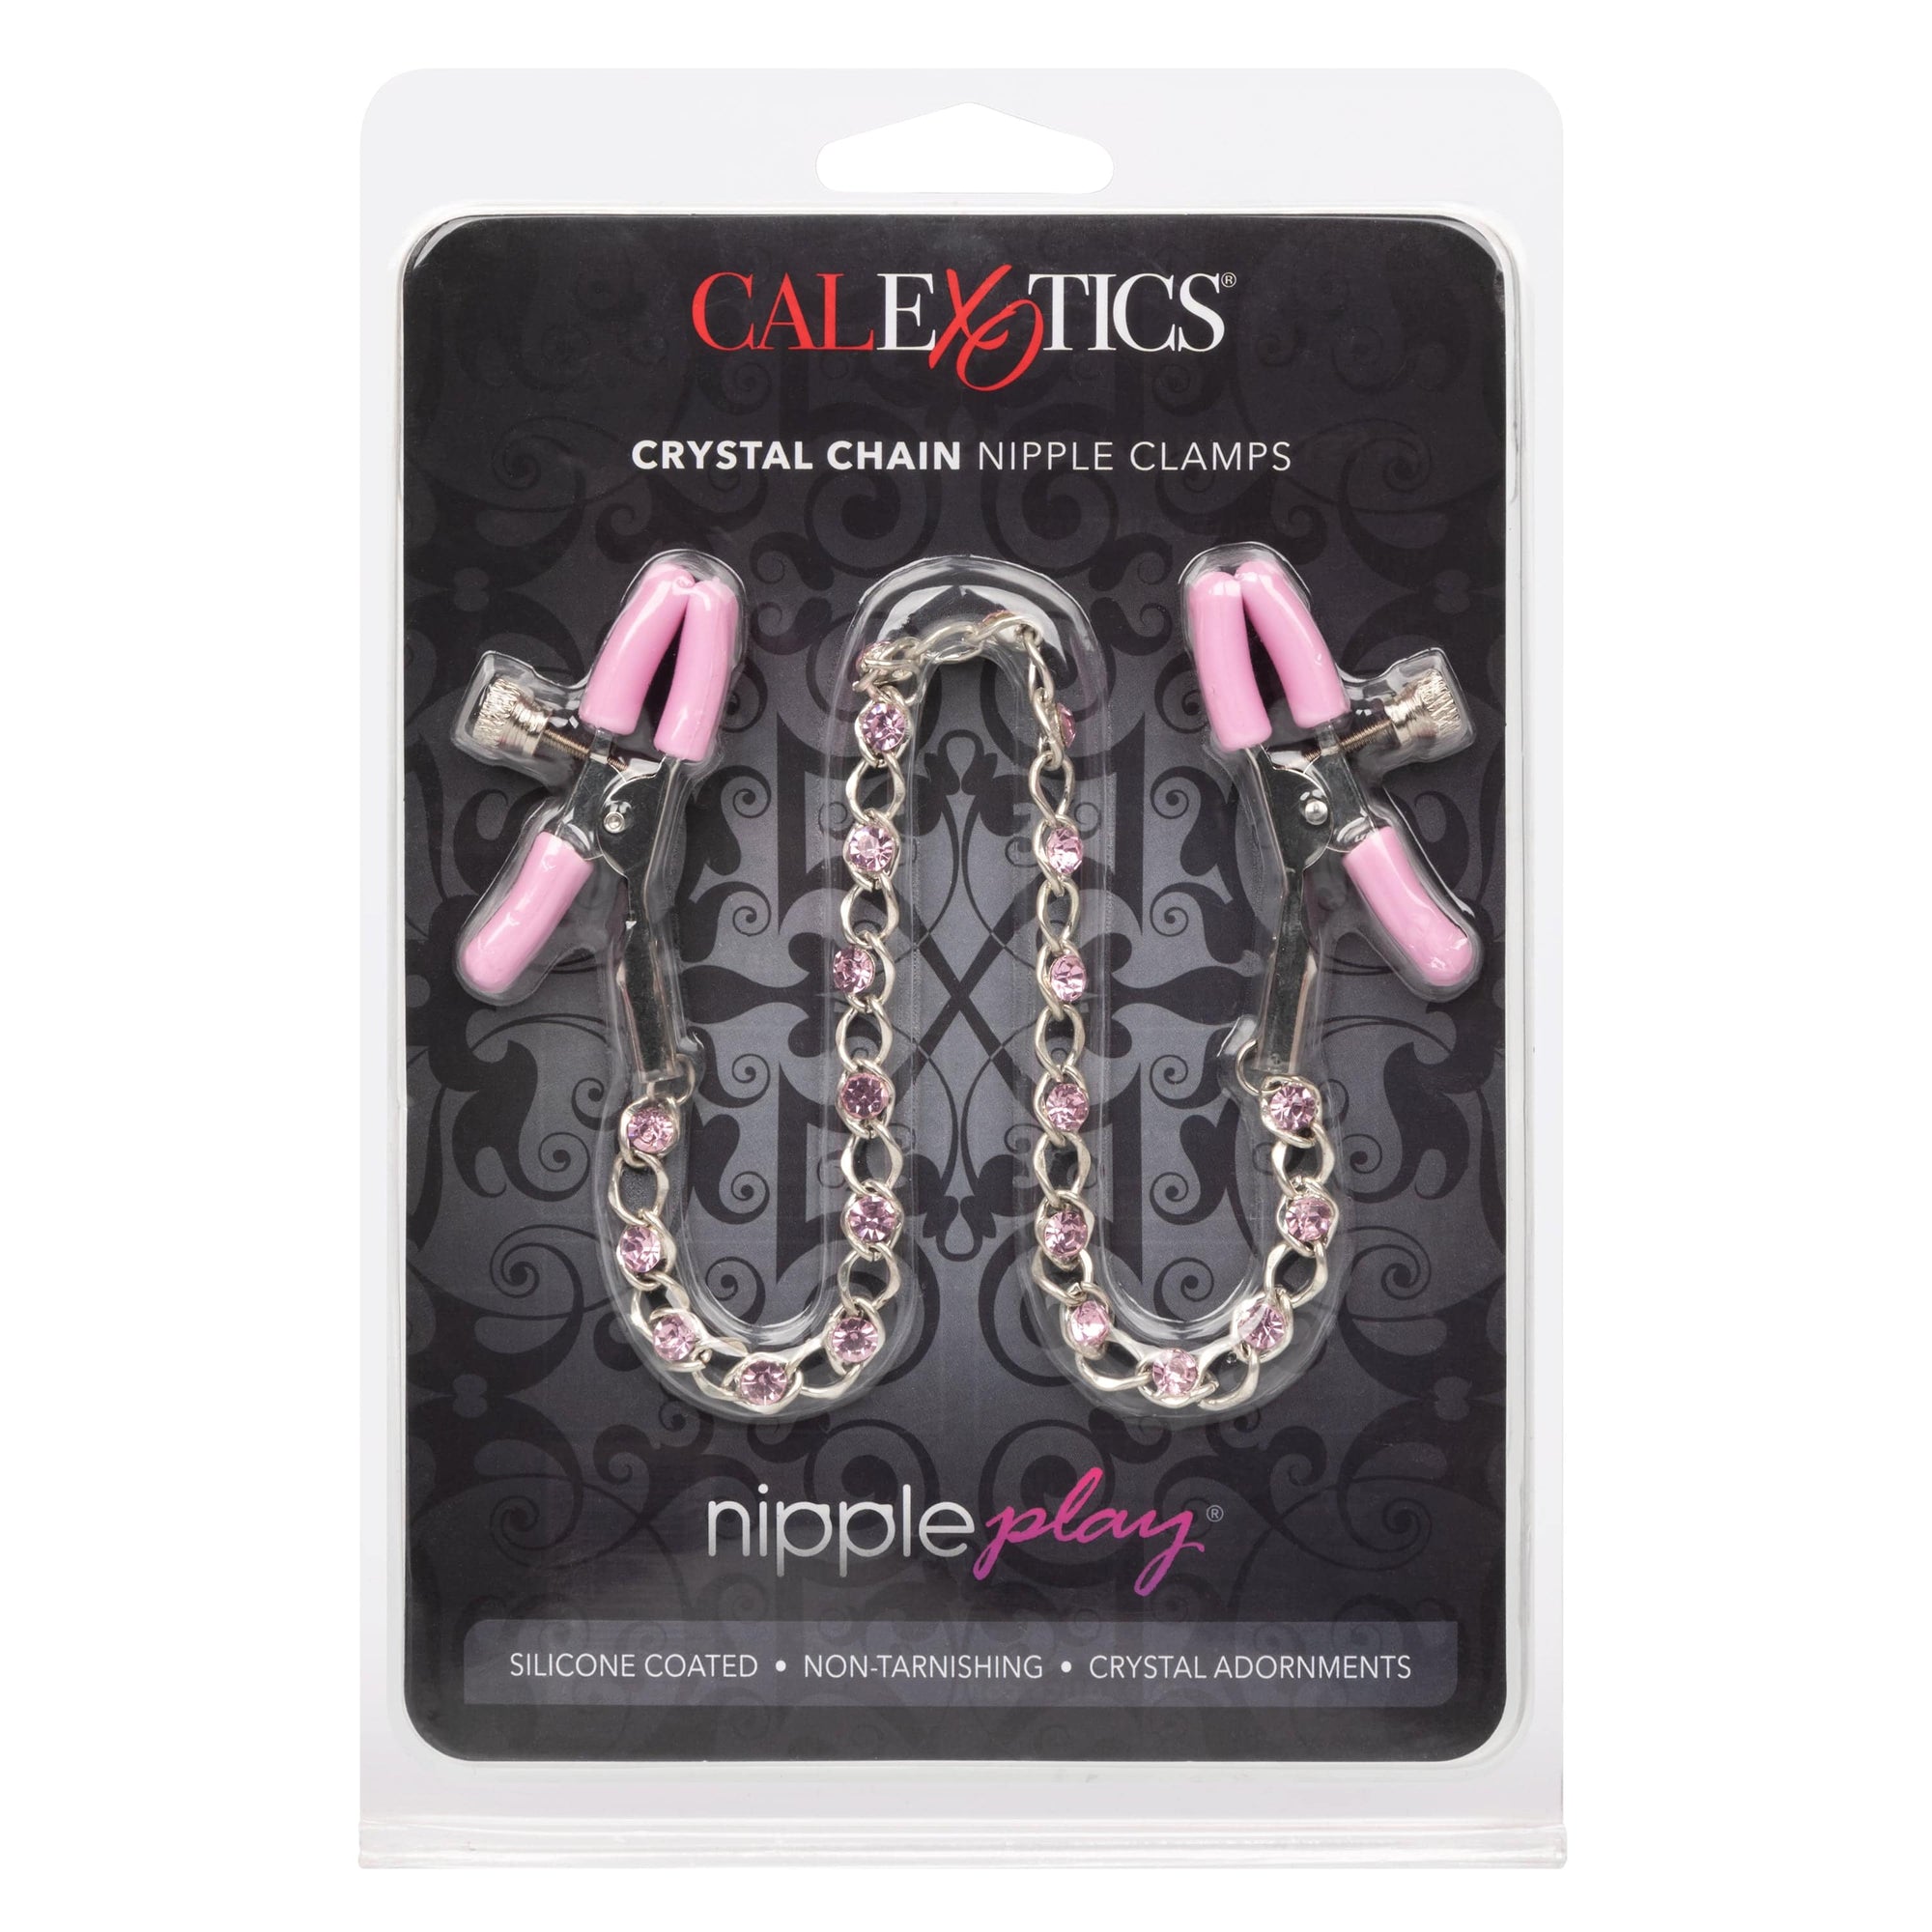 California Exotics - Nipple Play Crystal Chain Nipple Clamps (Pink) -  Panties Massager Remote Control (Vibration) Rechargeable  Durio.sg